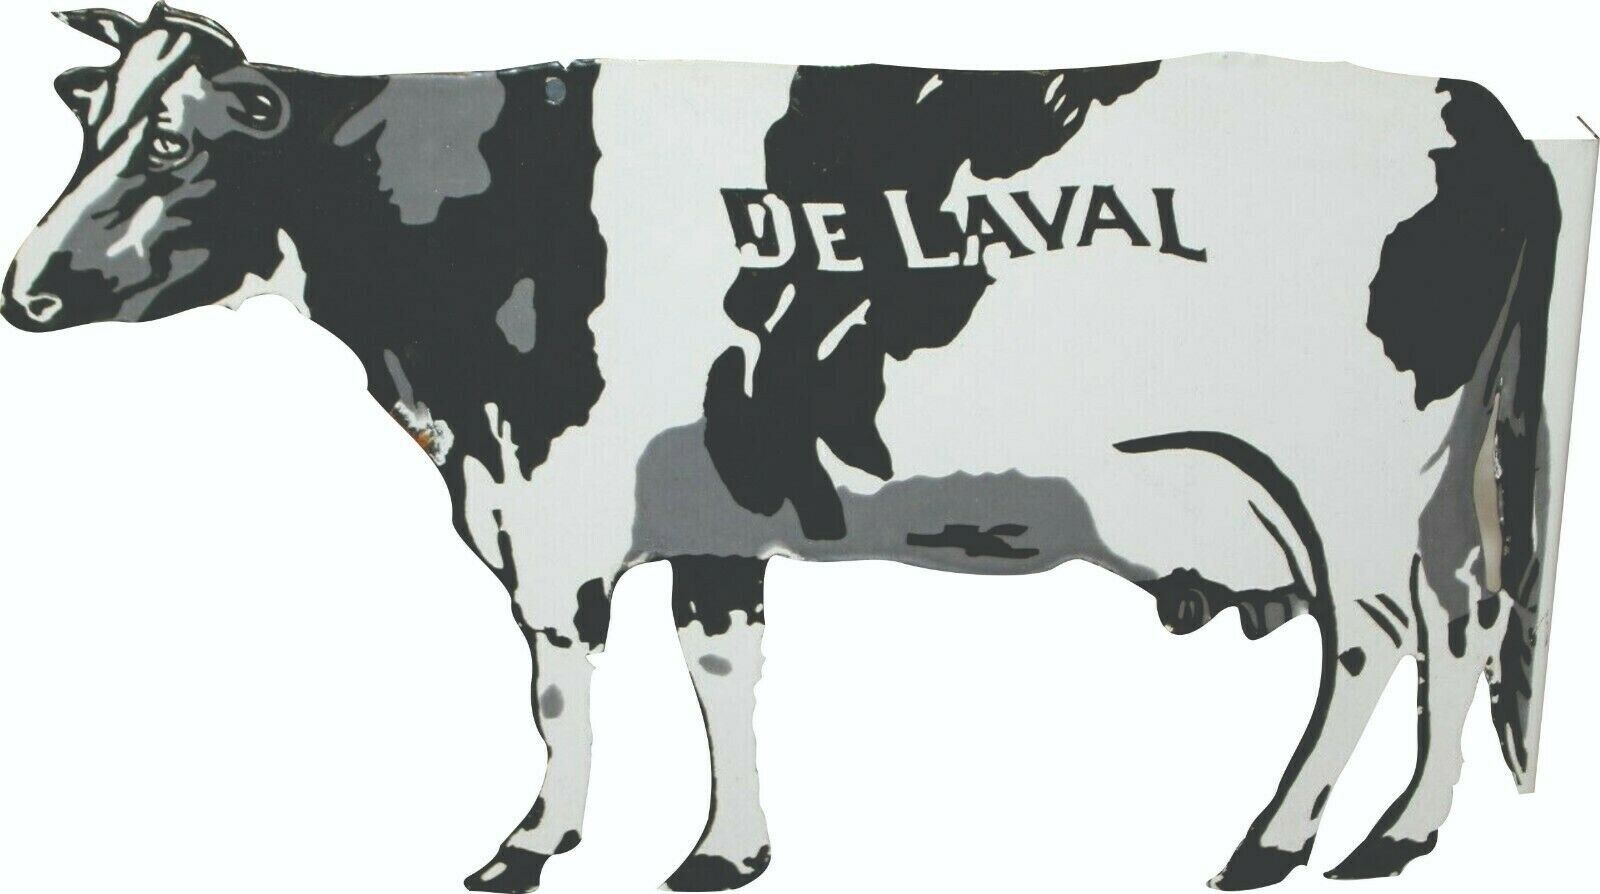 PORCELAIN DE LAVAL ENAMEL SIGN 19X11 INCHES DOUBLE SIDED WITH FLANGE